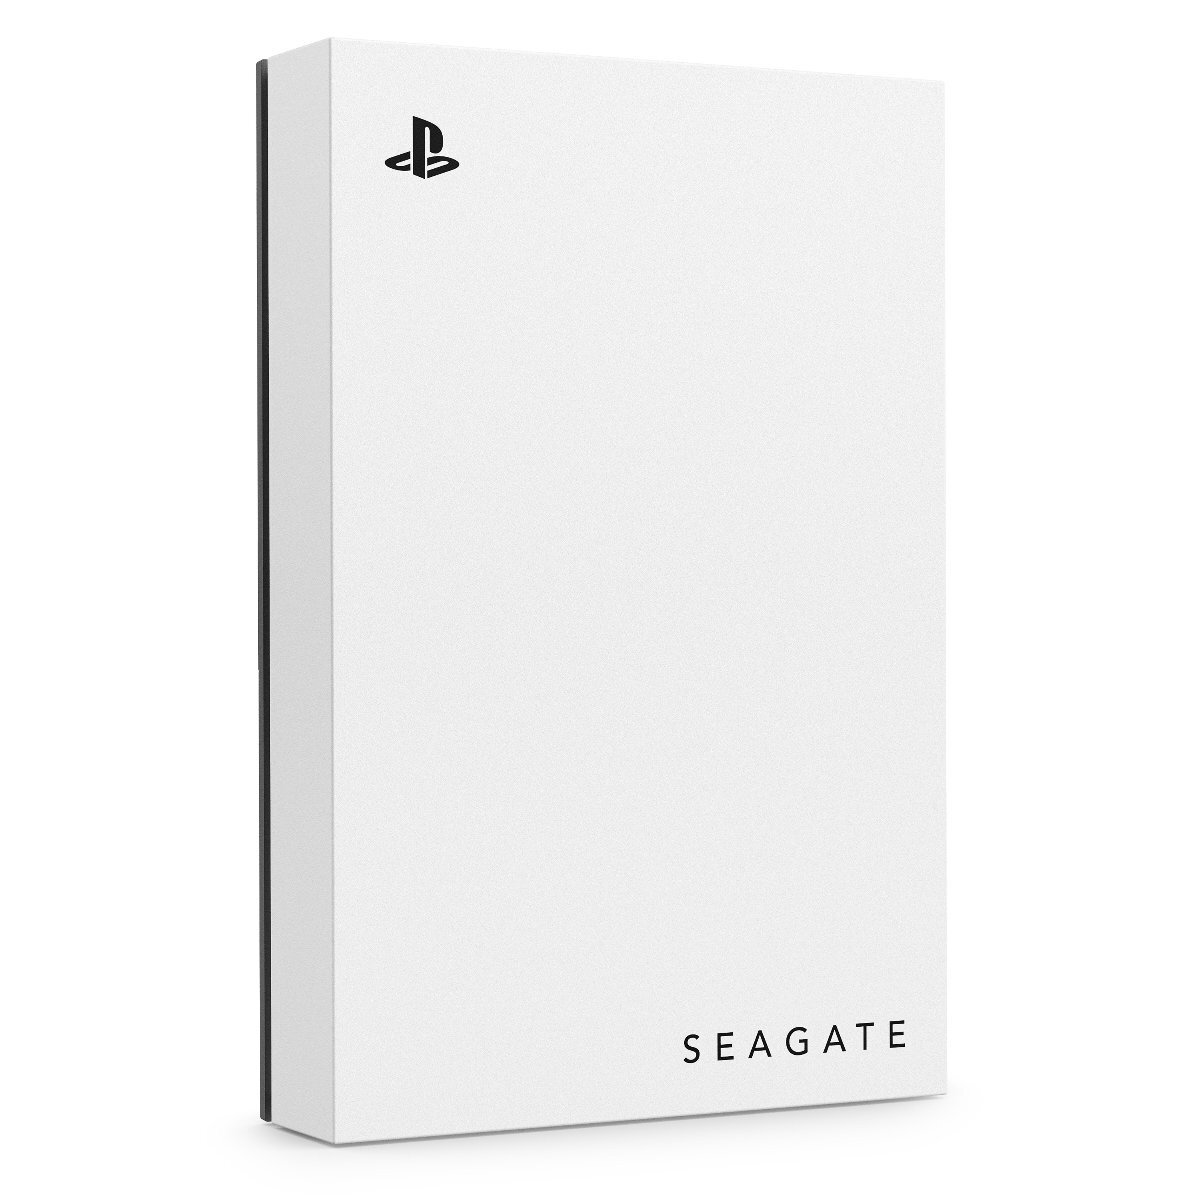 SeagateがPS公式ライセンス外付けHDD「Game Drive for PS5」を発売開始！